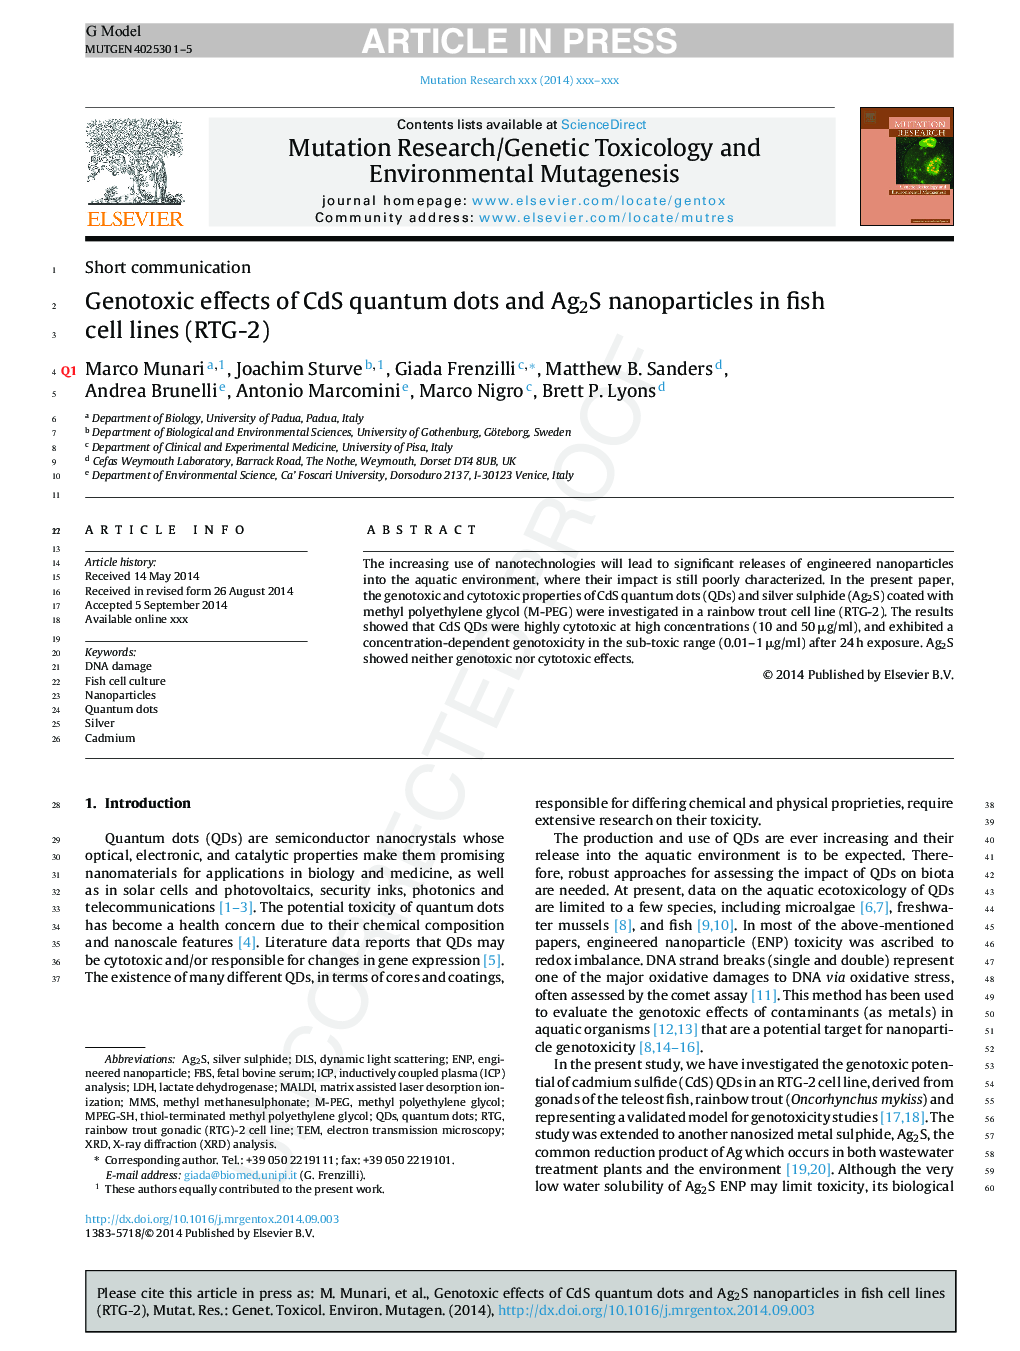 Genotoxic effects of CdS quantum dots and Ag2S nanoparticles in fish cell lines (RTG-2)